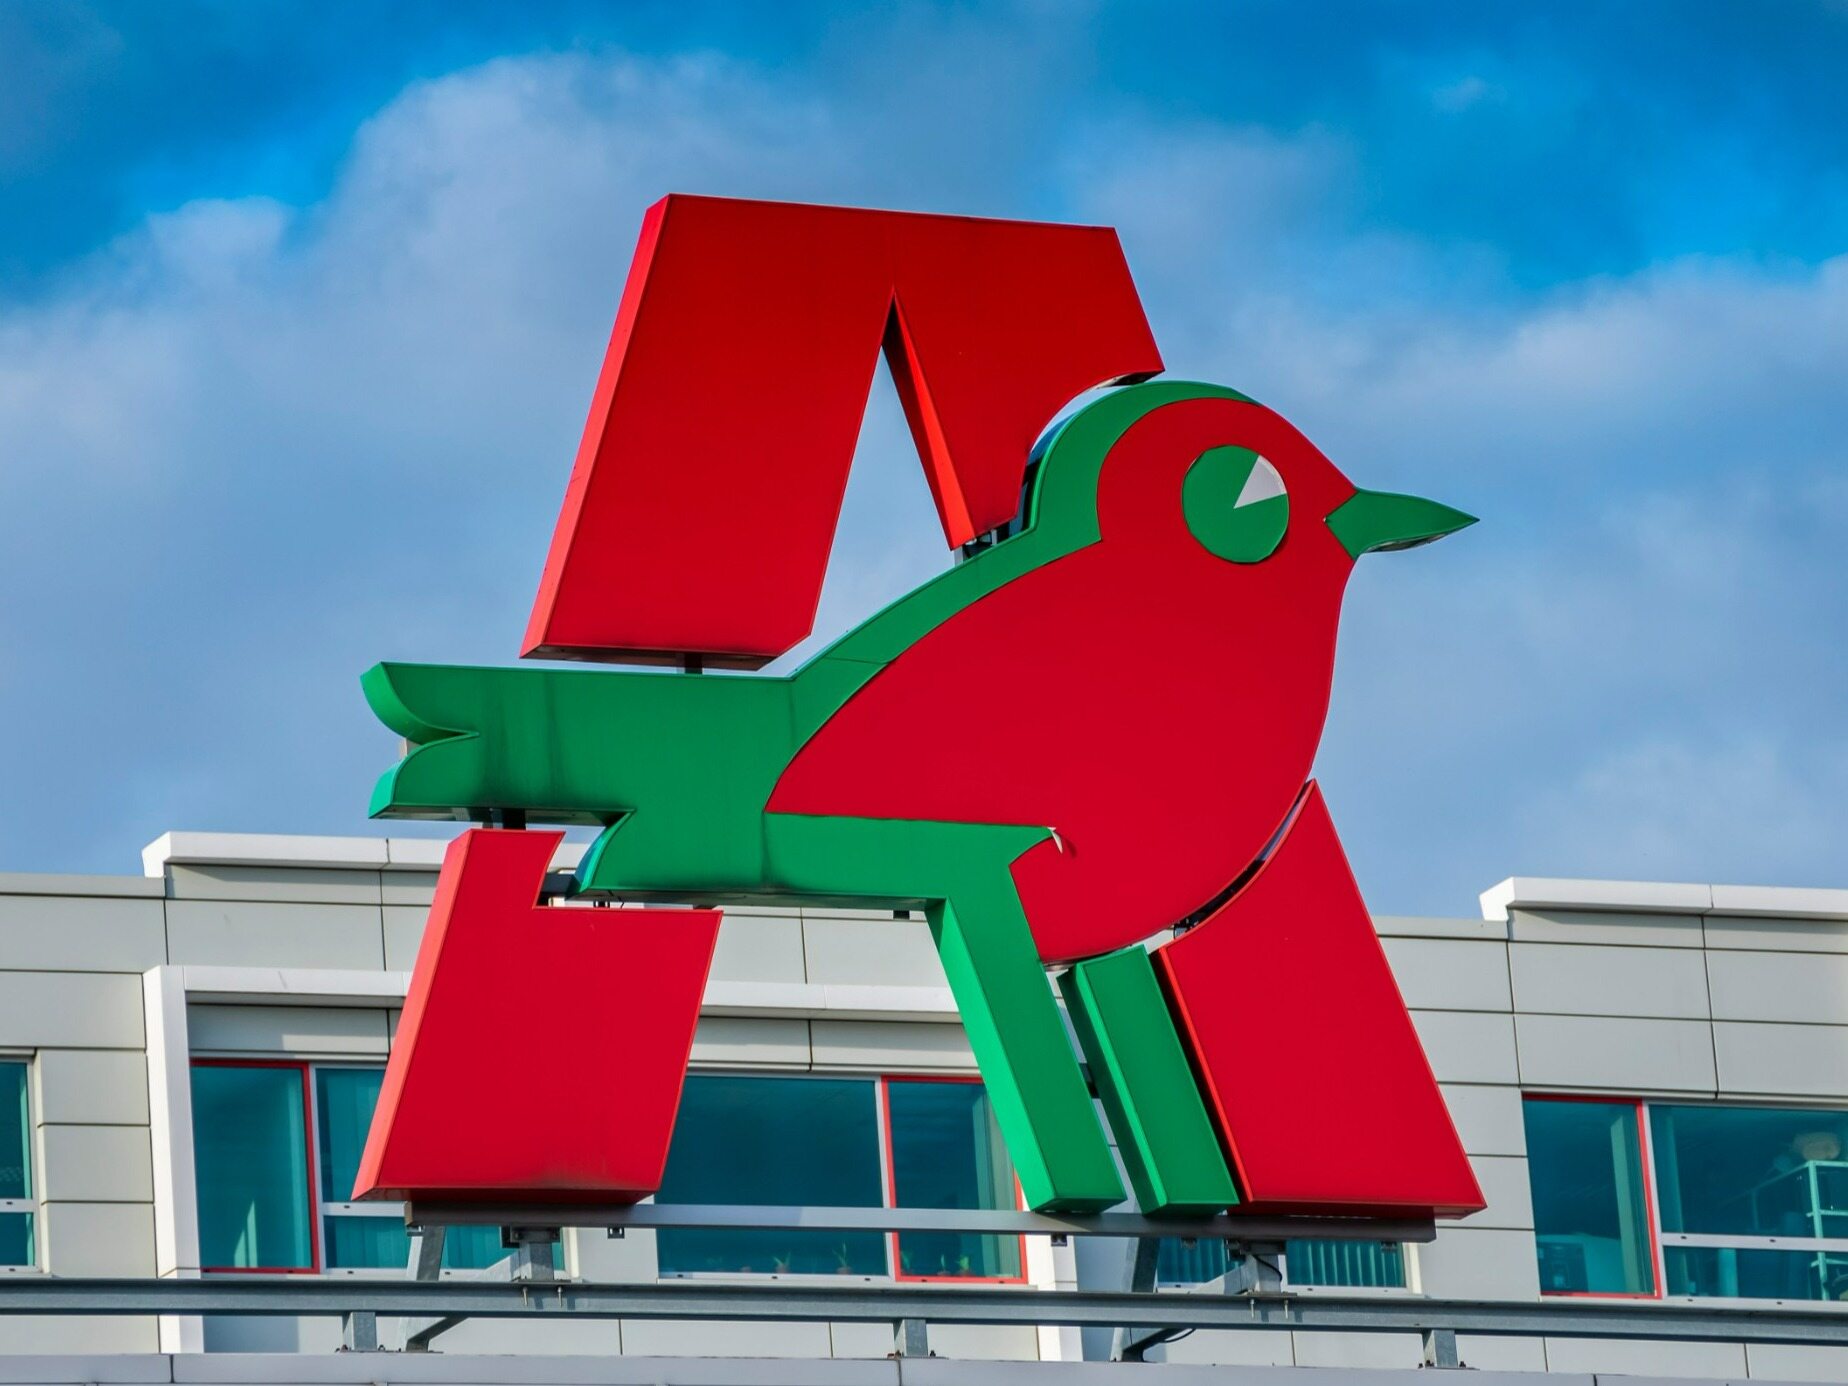 Sudden liquidation of the Auchan store.  Employees seize the goods, fearing loss of wages